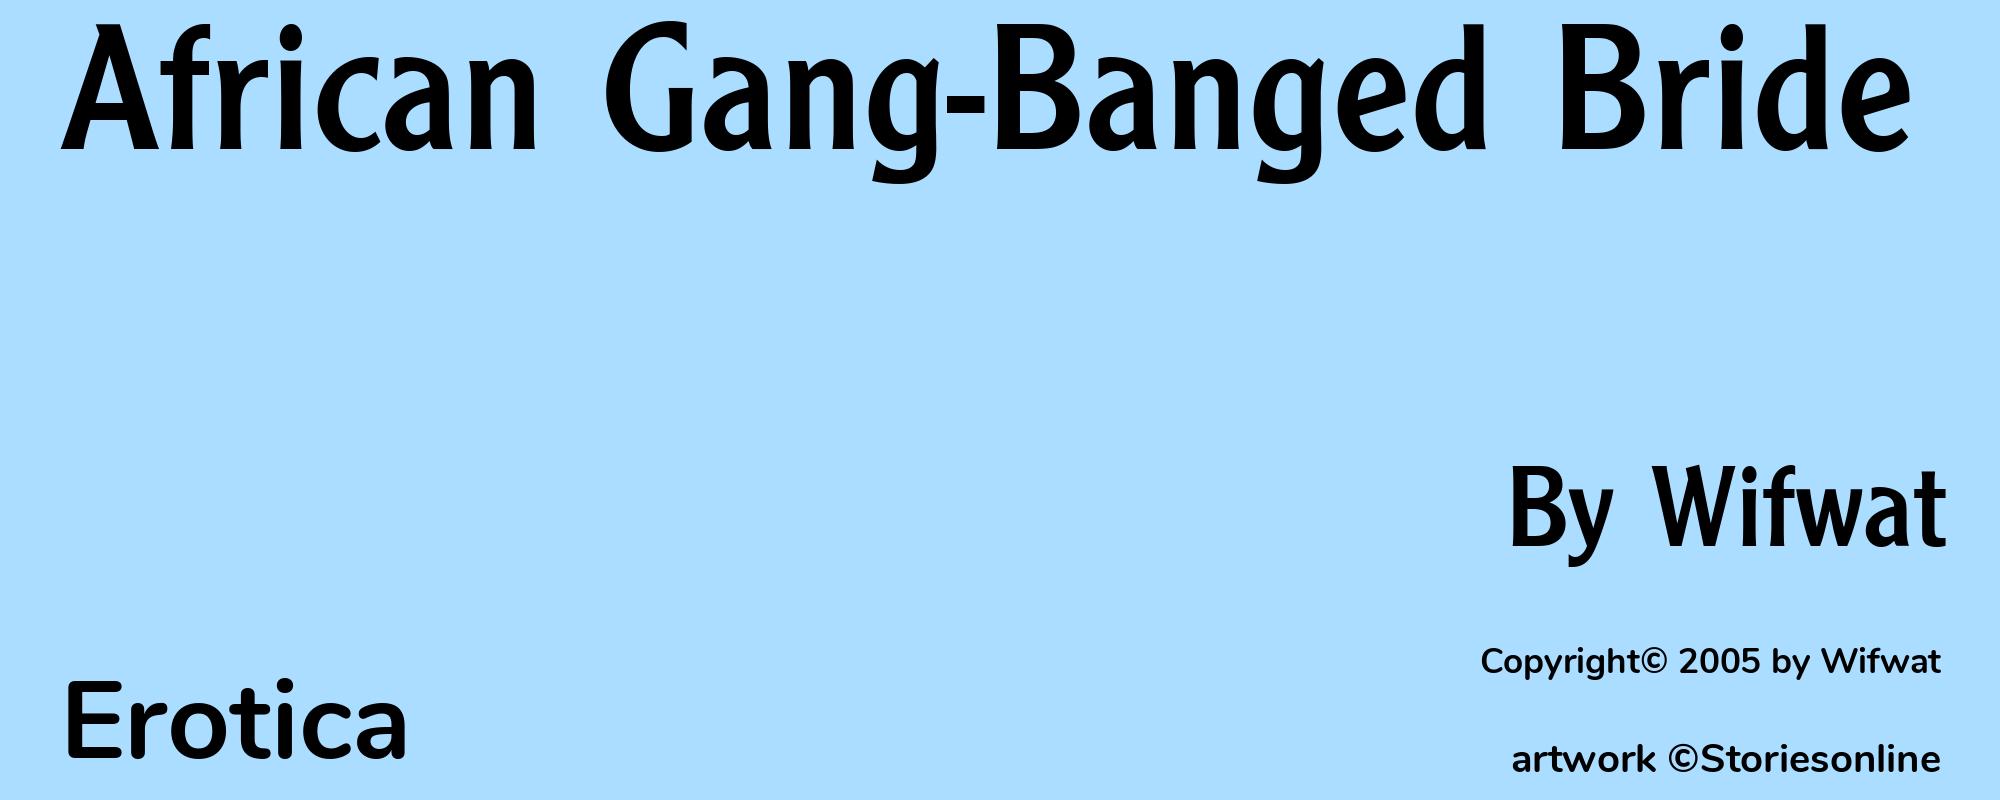 African Gang-Banged Bride - Cover